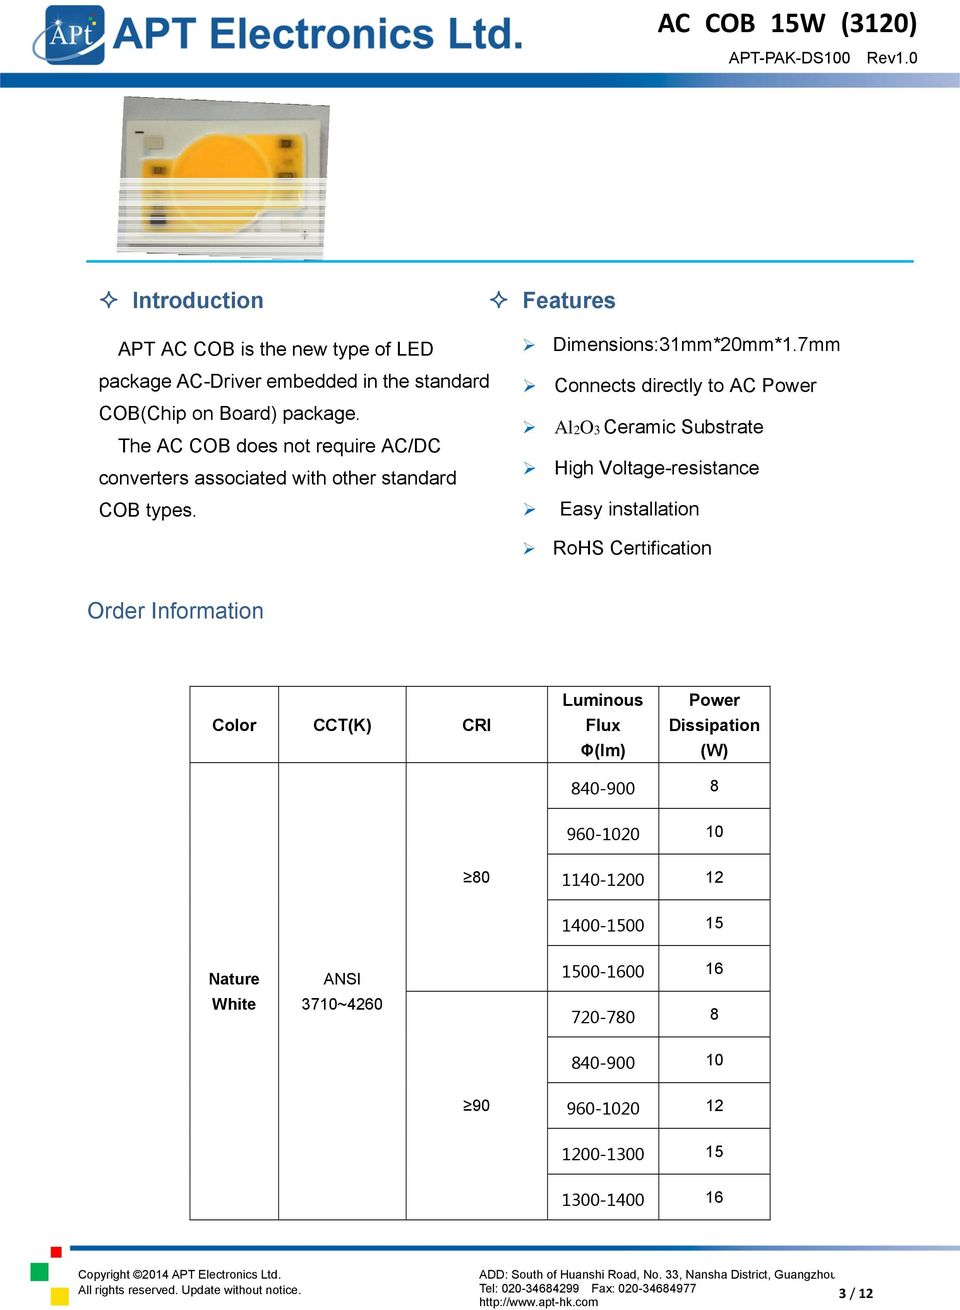 The AC COB does not require AC/DC converters associated with other standard COB types.